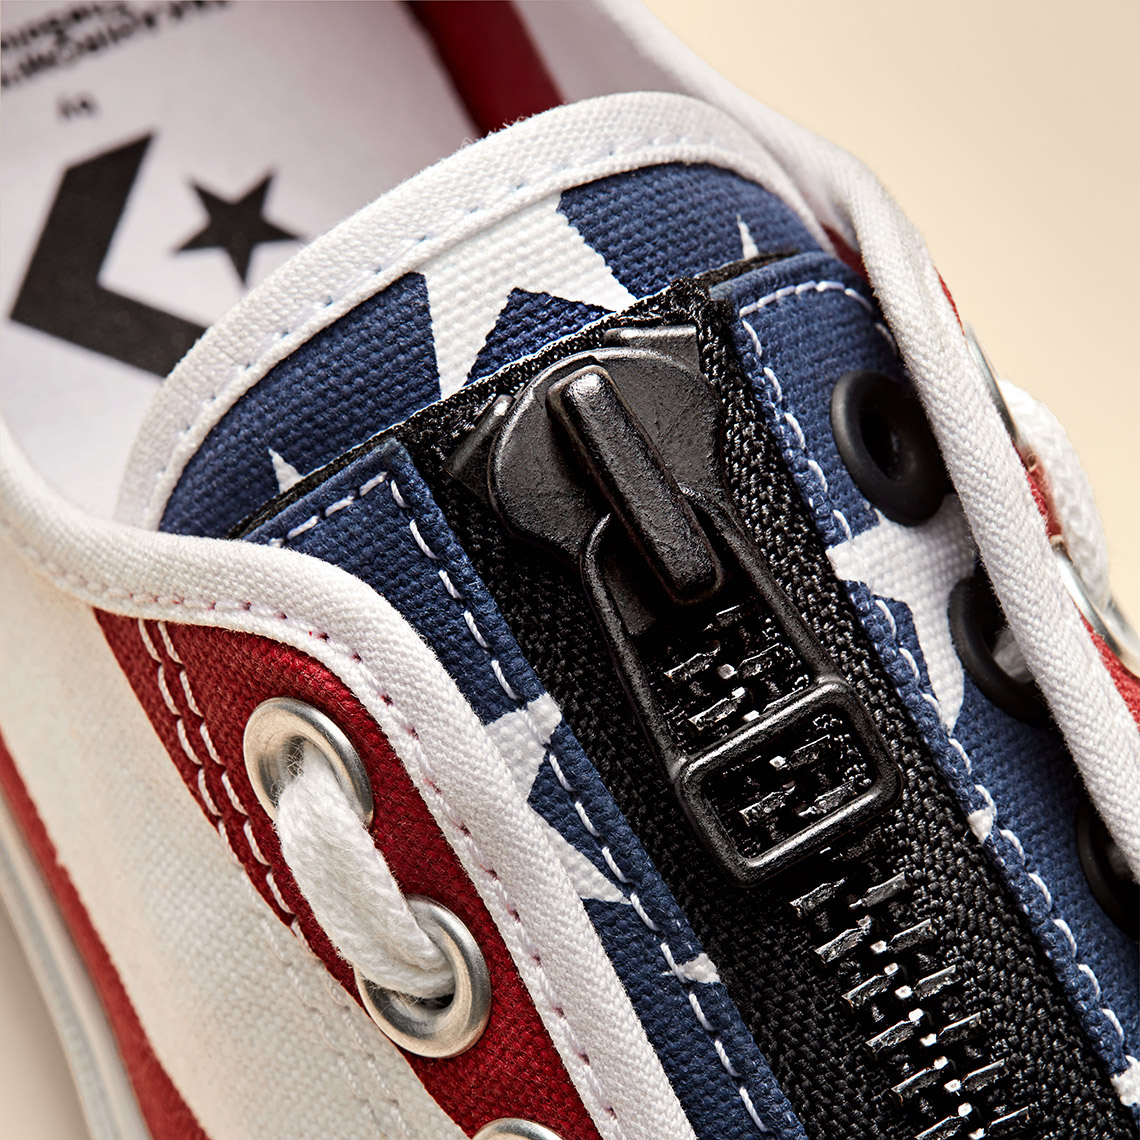 Soloist freshness feature converse 99th anniversary more Americana 6